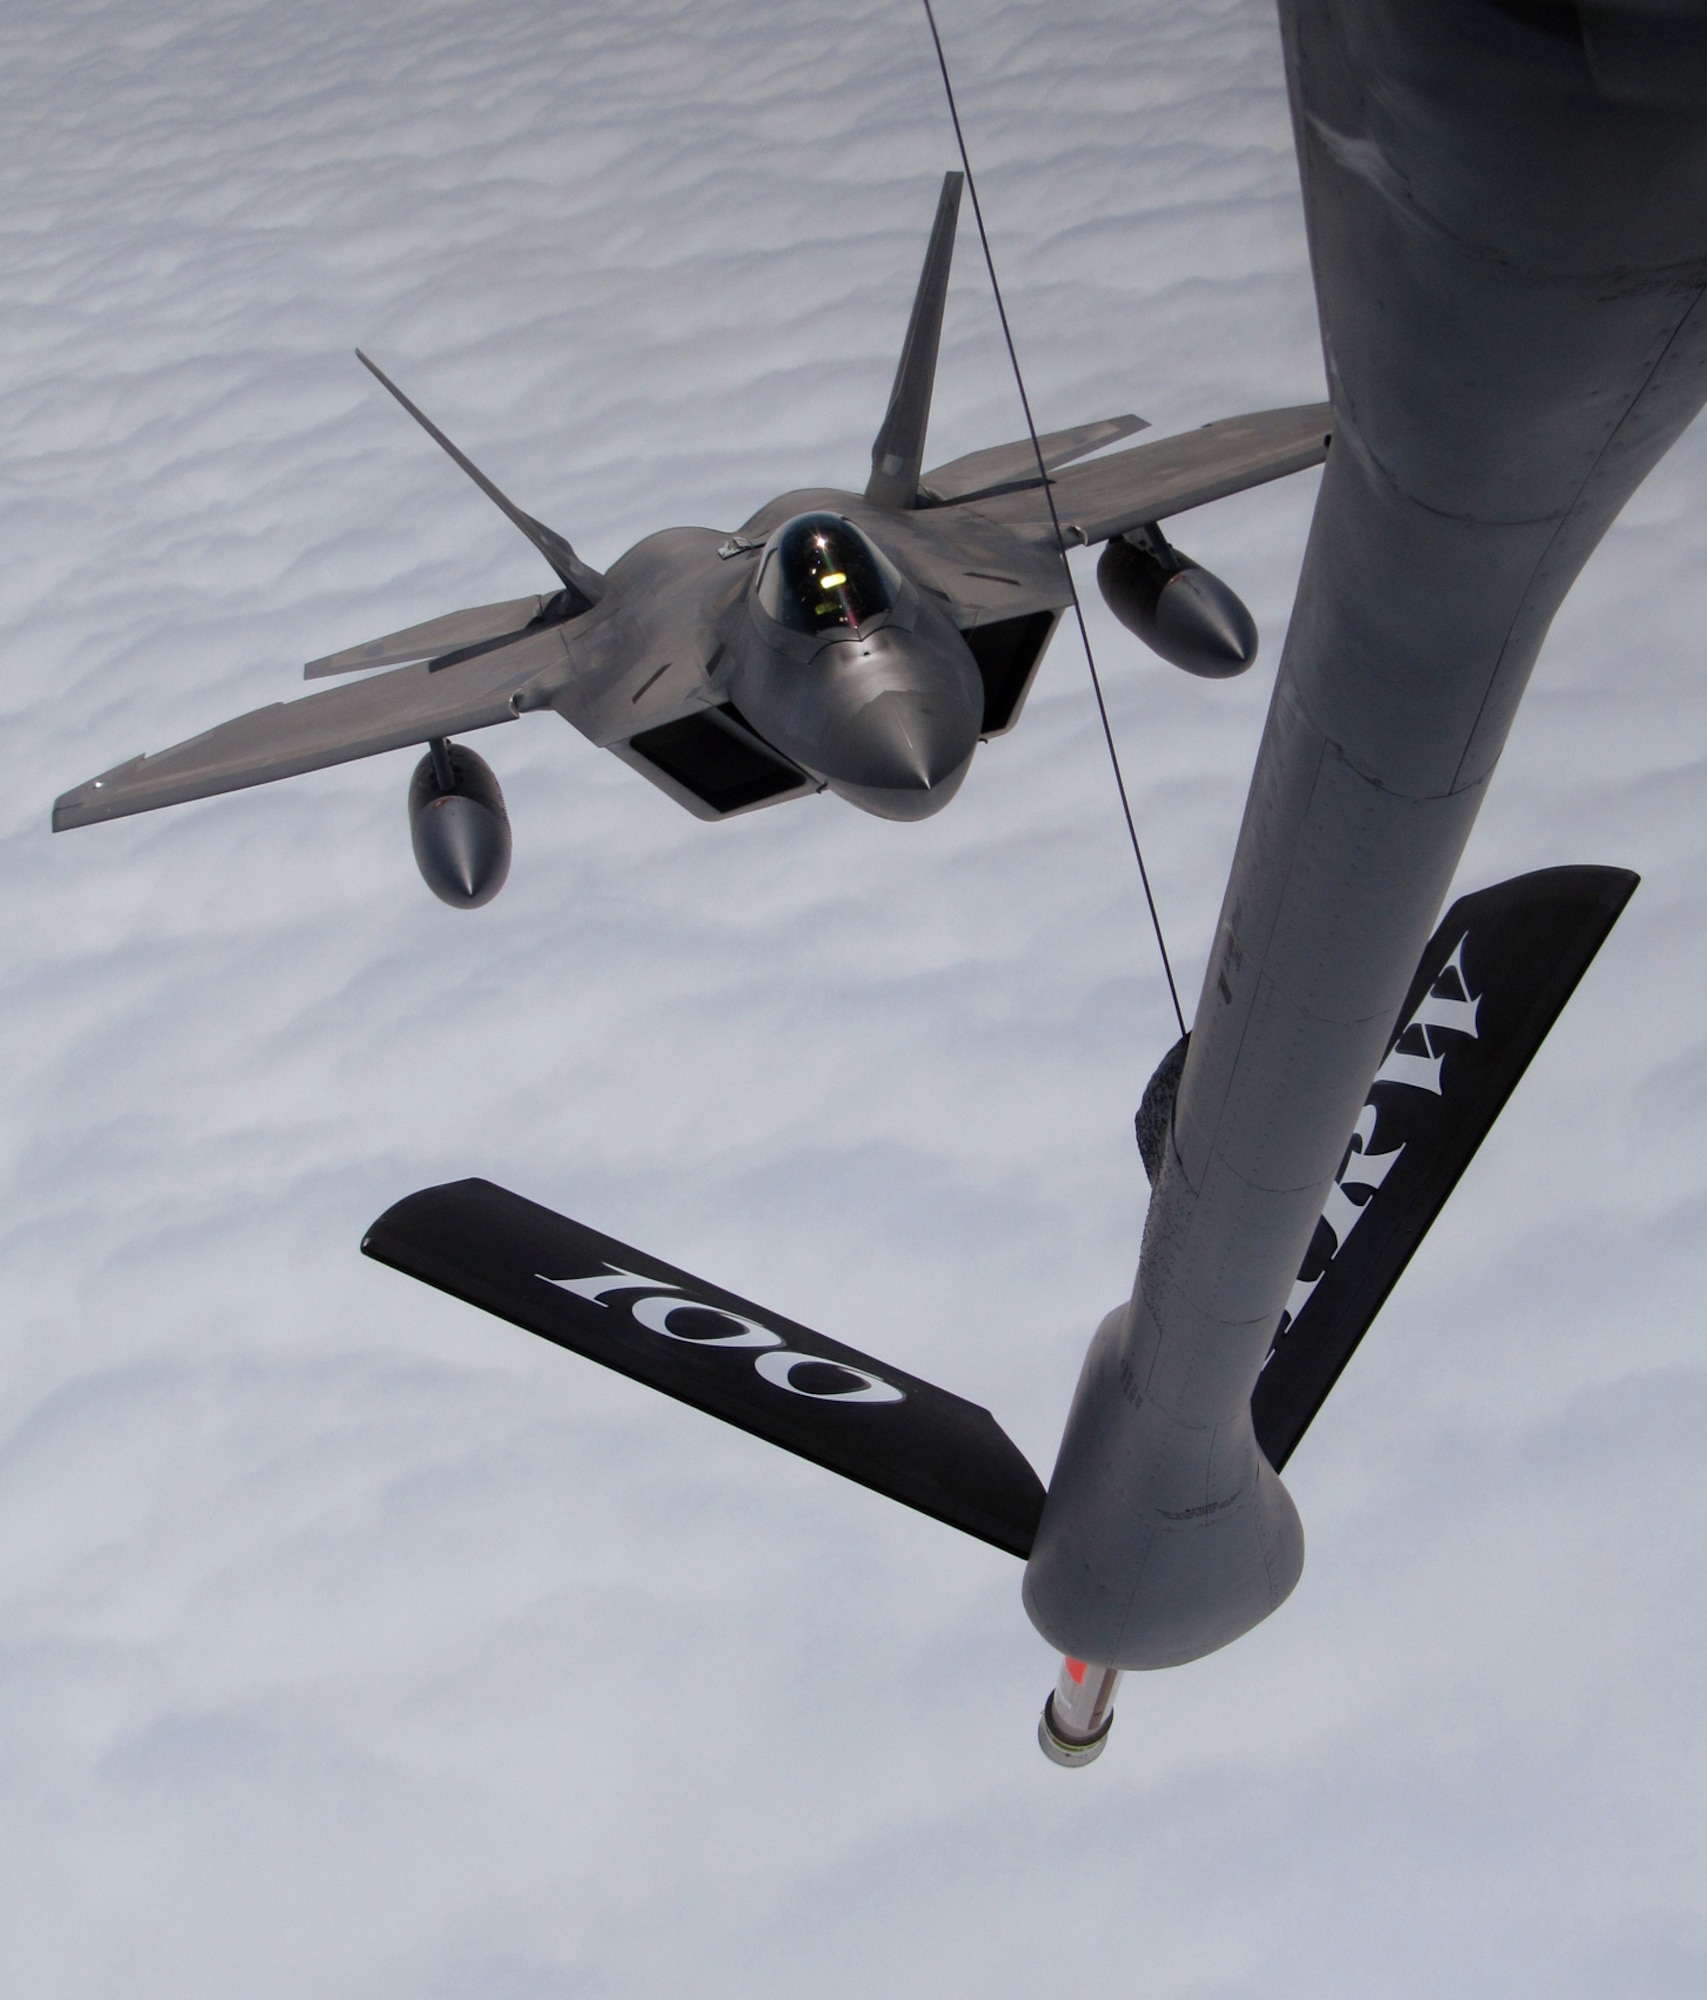 RAF MILDENHALL, England -- An F-22 Raptor from Elmendorf Air Force Base, Alaska, approaches the boom of a 100th Air Refueling Wing KC-135 Stratotanker July 27.  Part of a Coronet mission, the tanker took two F-22s halfway across the Atlantic Ocean before handing them off to another tanker for the rest of the journey.  (U.S. Air Force photo/Staff Sgt. Austin M. May)